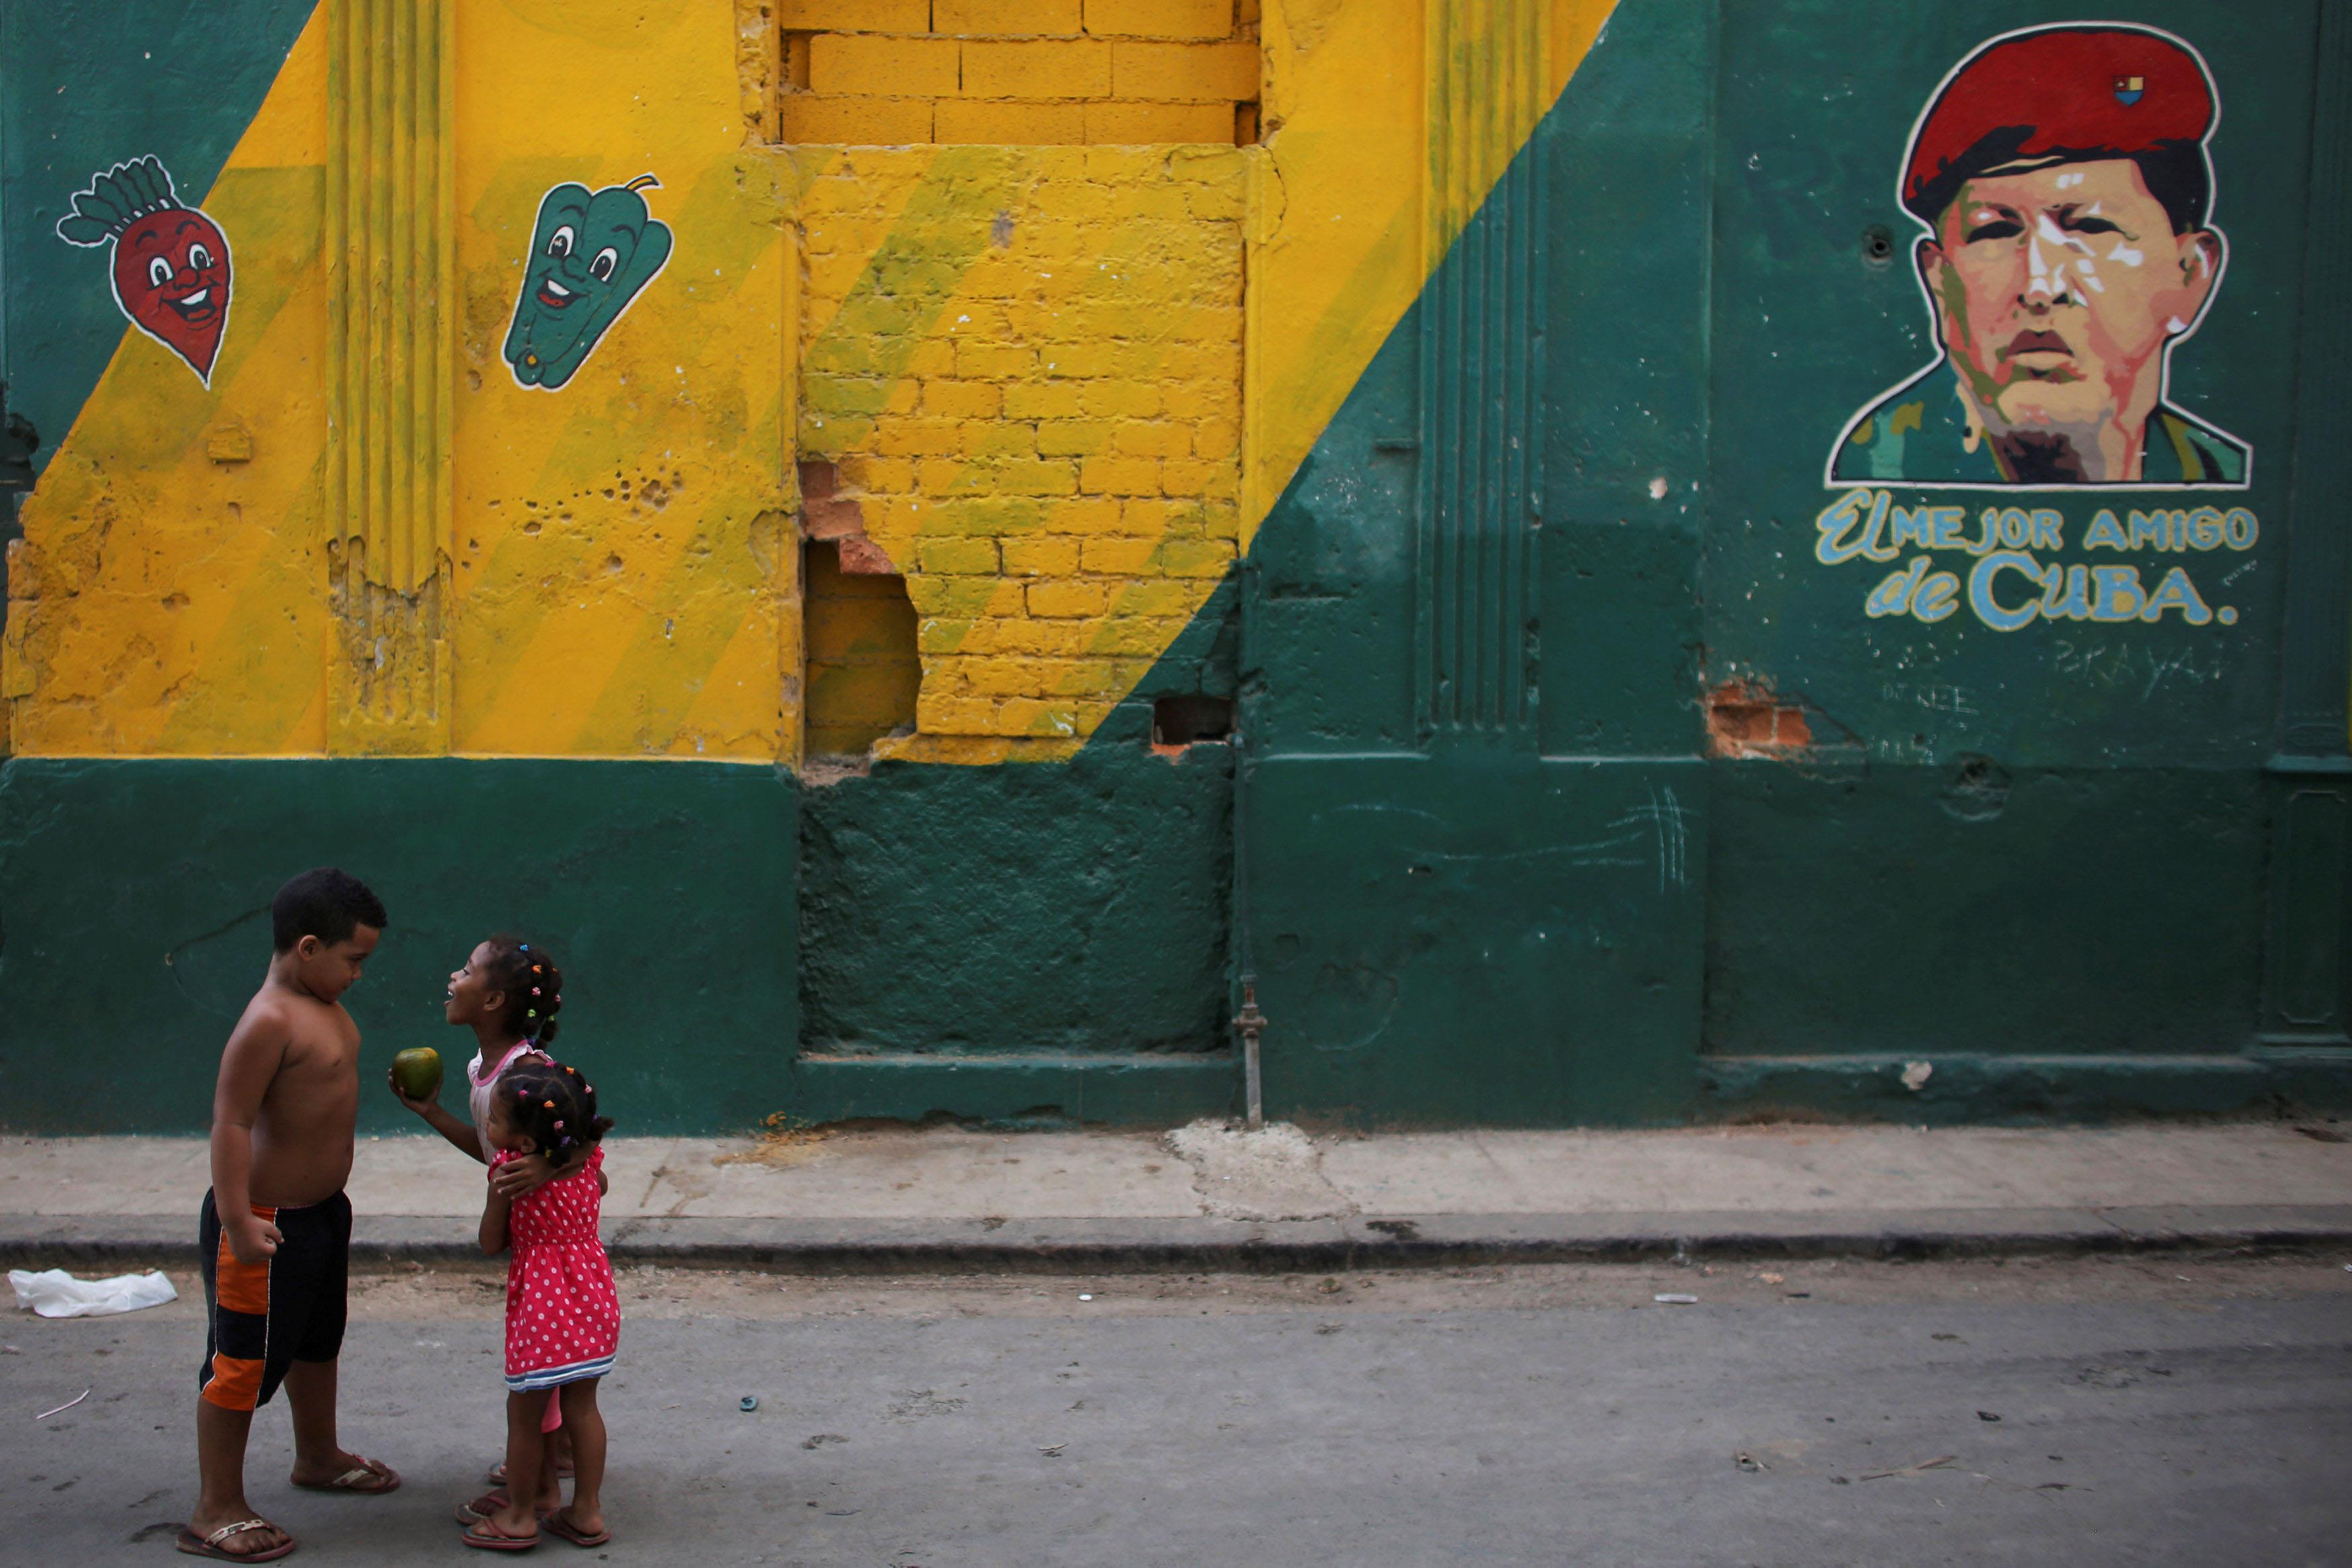 Children play next to an image depicting Venezuela's late president Hugo Chavez on a wall that reads